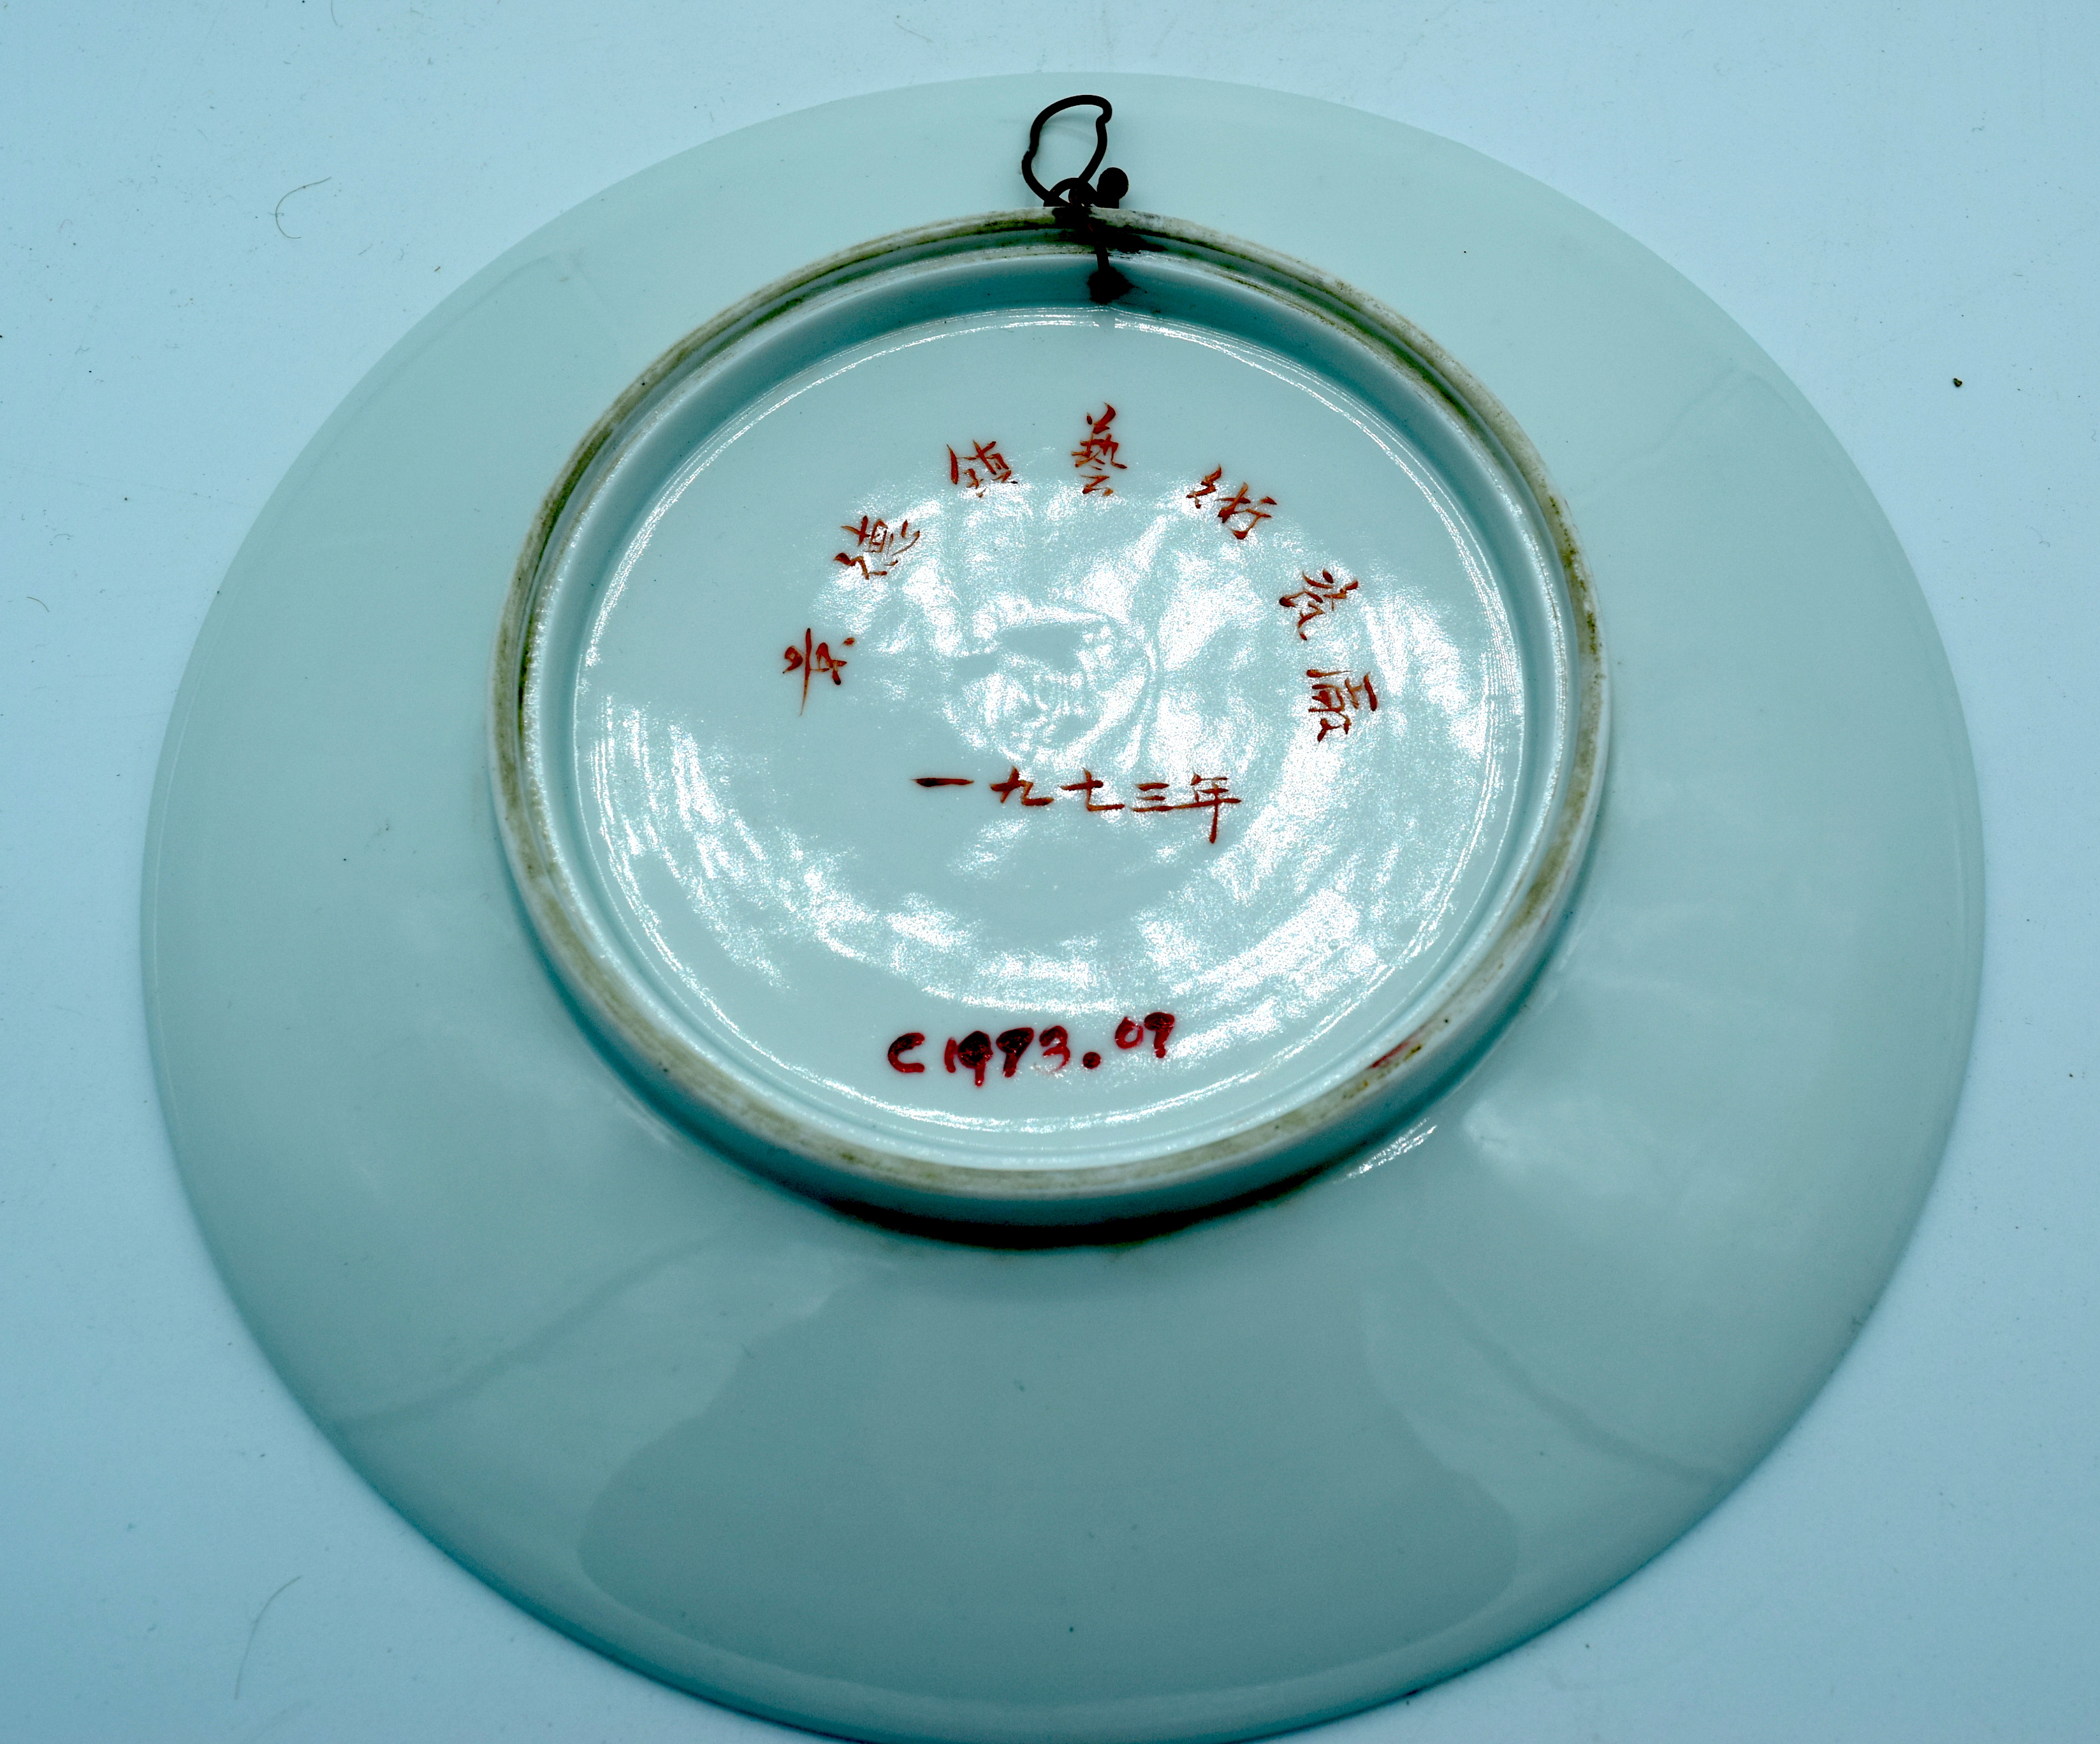 A Chinese plate celebrating 1973 decorated with a snowy landscape. - Image 2 of 3